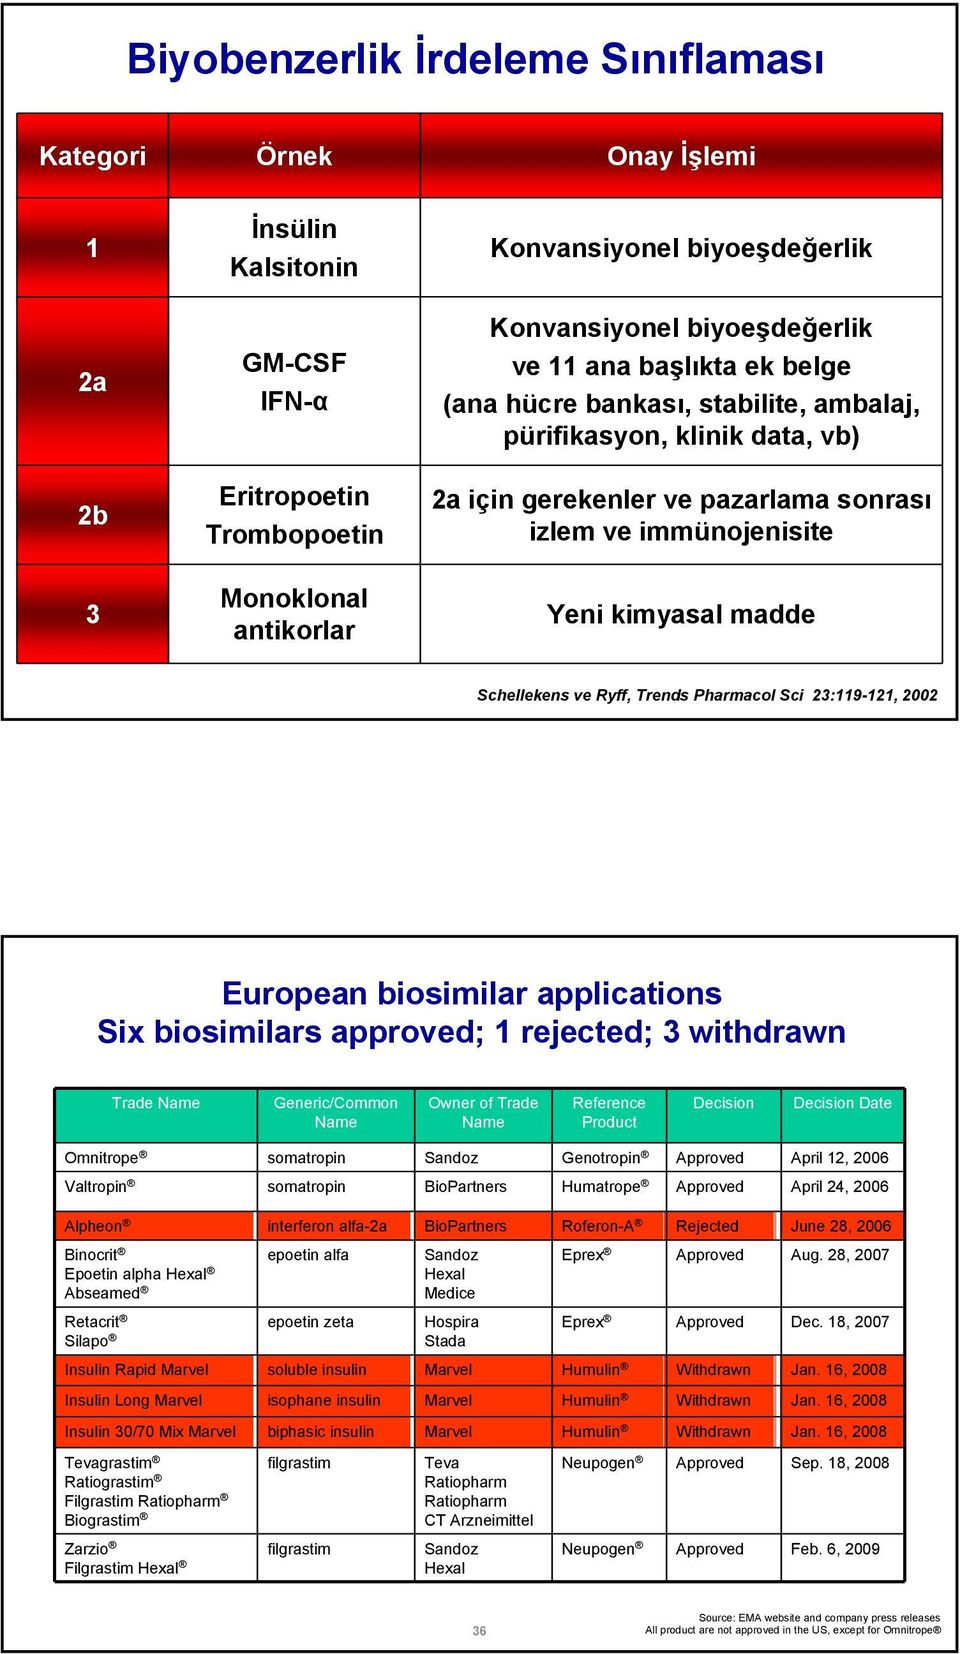 Schellekens ve Ryff, Trends Pharmacol Sci 23:119-121, 2002 European biosimilar applications Six biosimilars approved; 1 rejected; 3 withdrawn Trade Name Generic/Common Name Owner of Trade Name